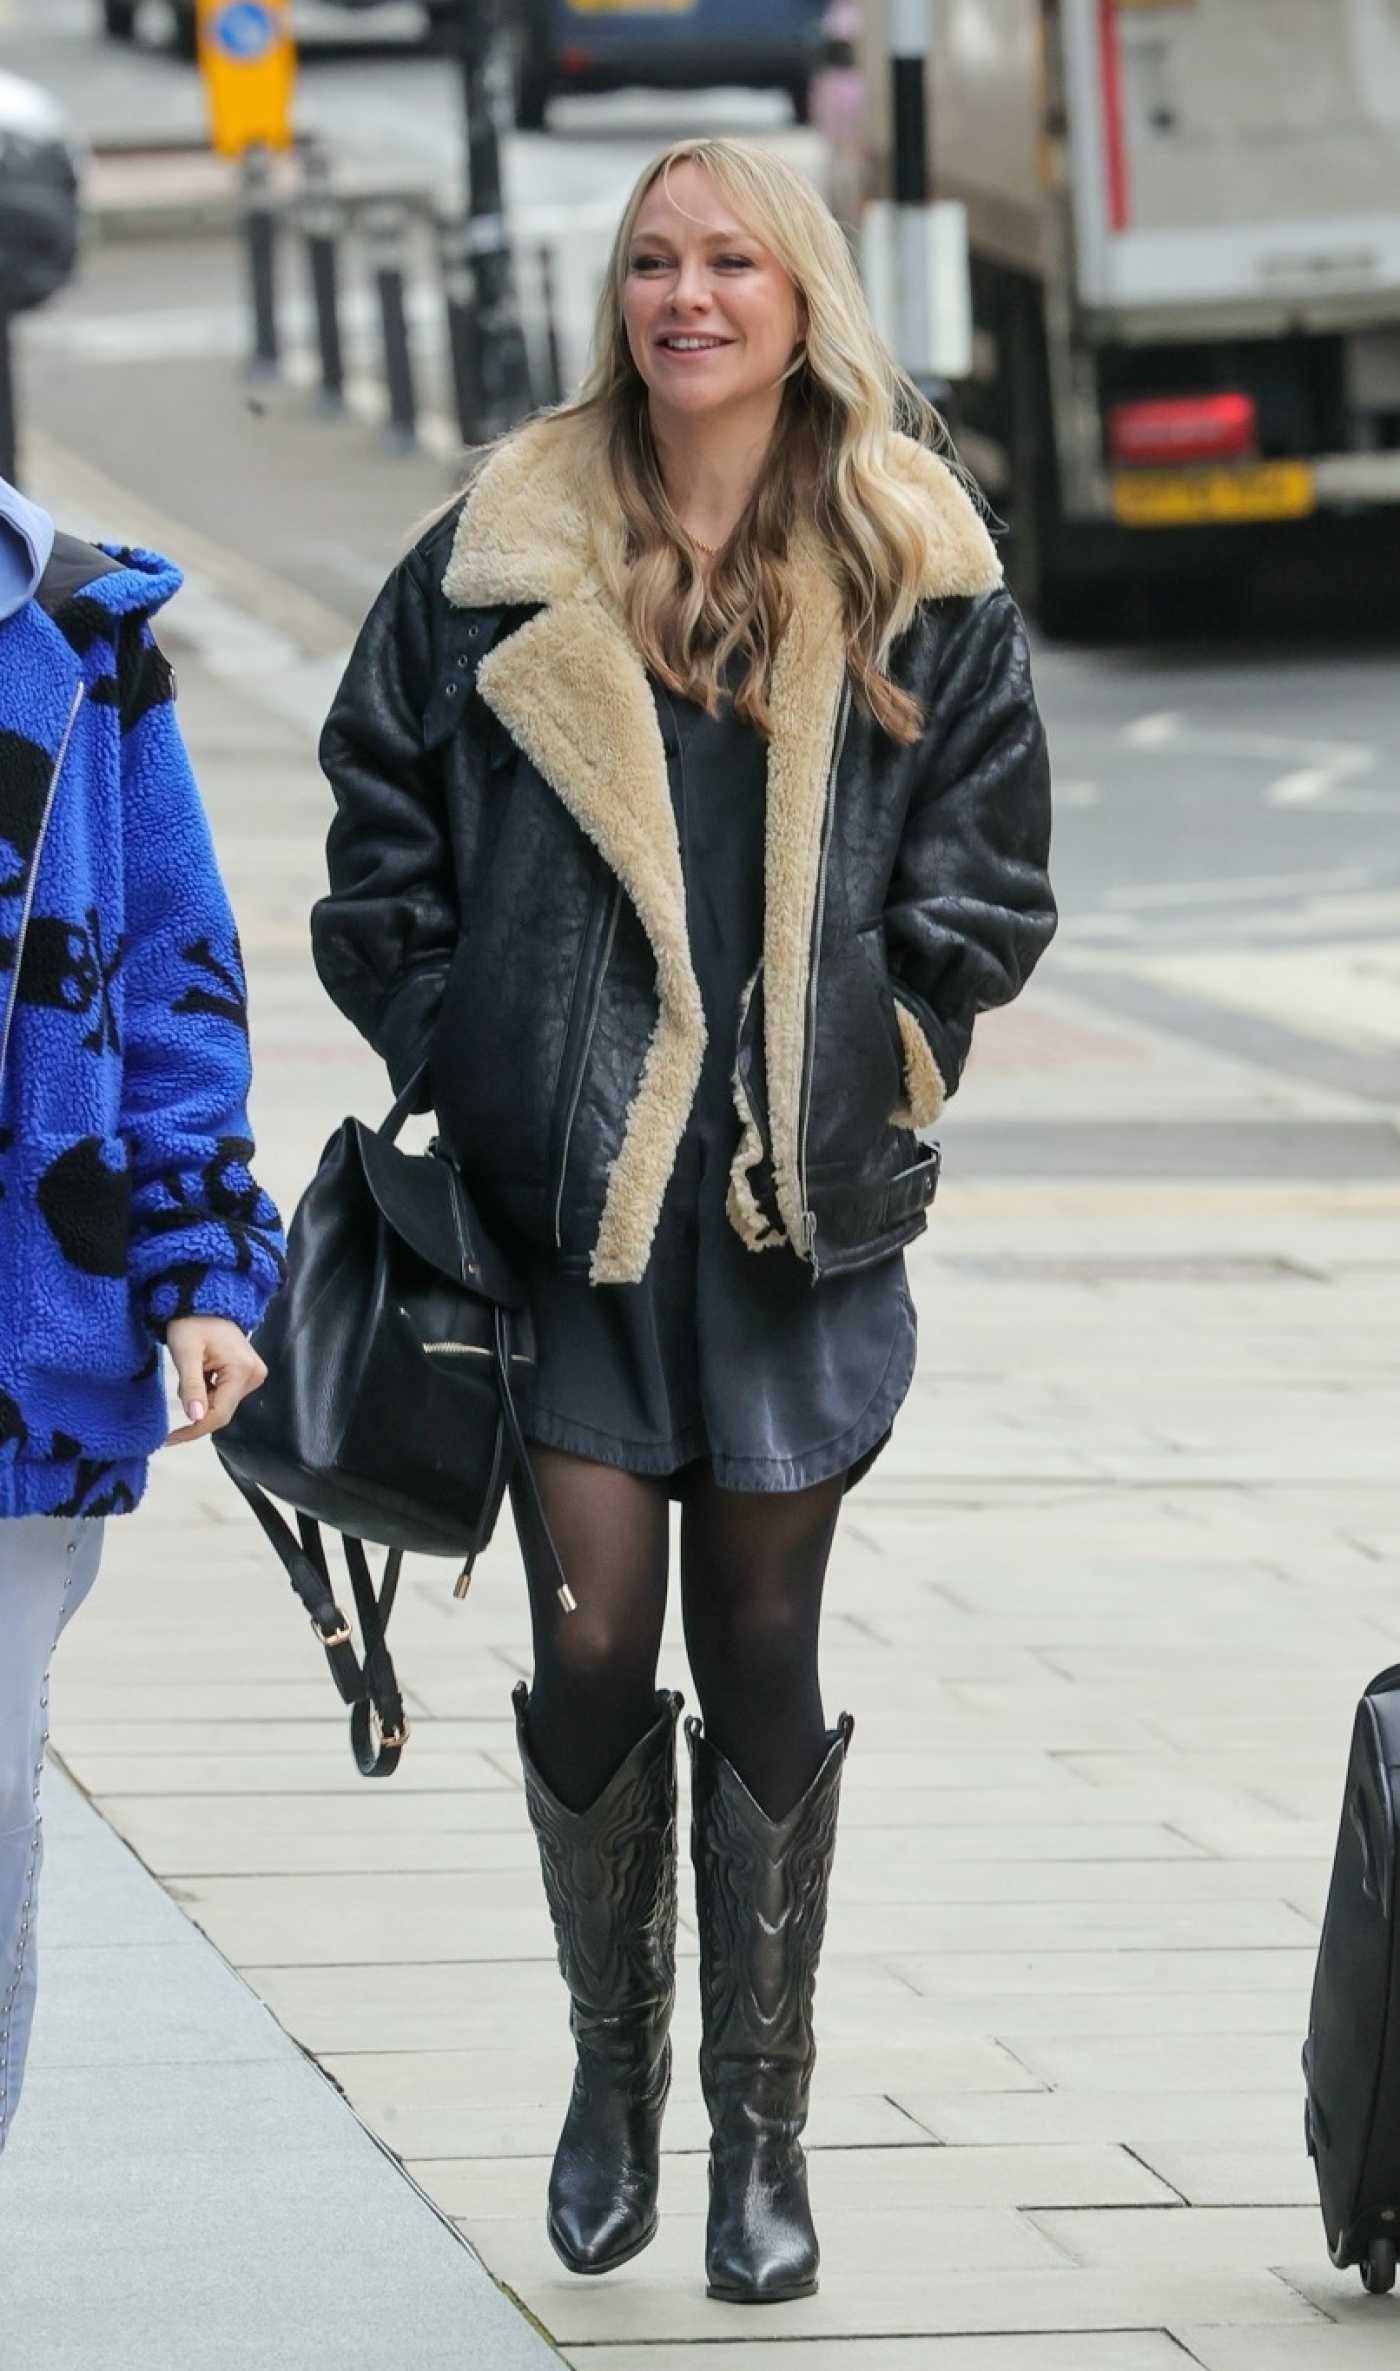 Chloe Madeley in a Black Leather Jacket Makes an Appearance on Jeremy Vine TV Show in London 02/20/2024